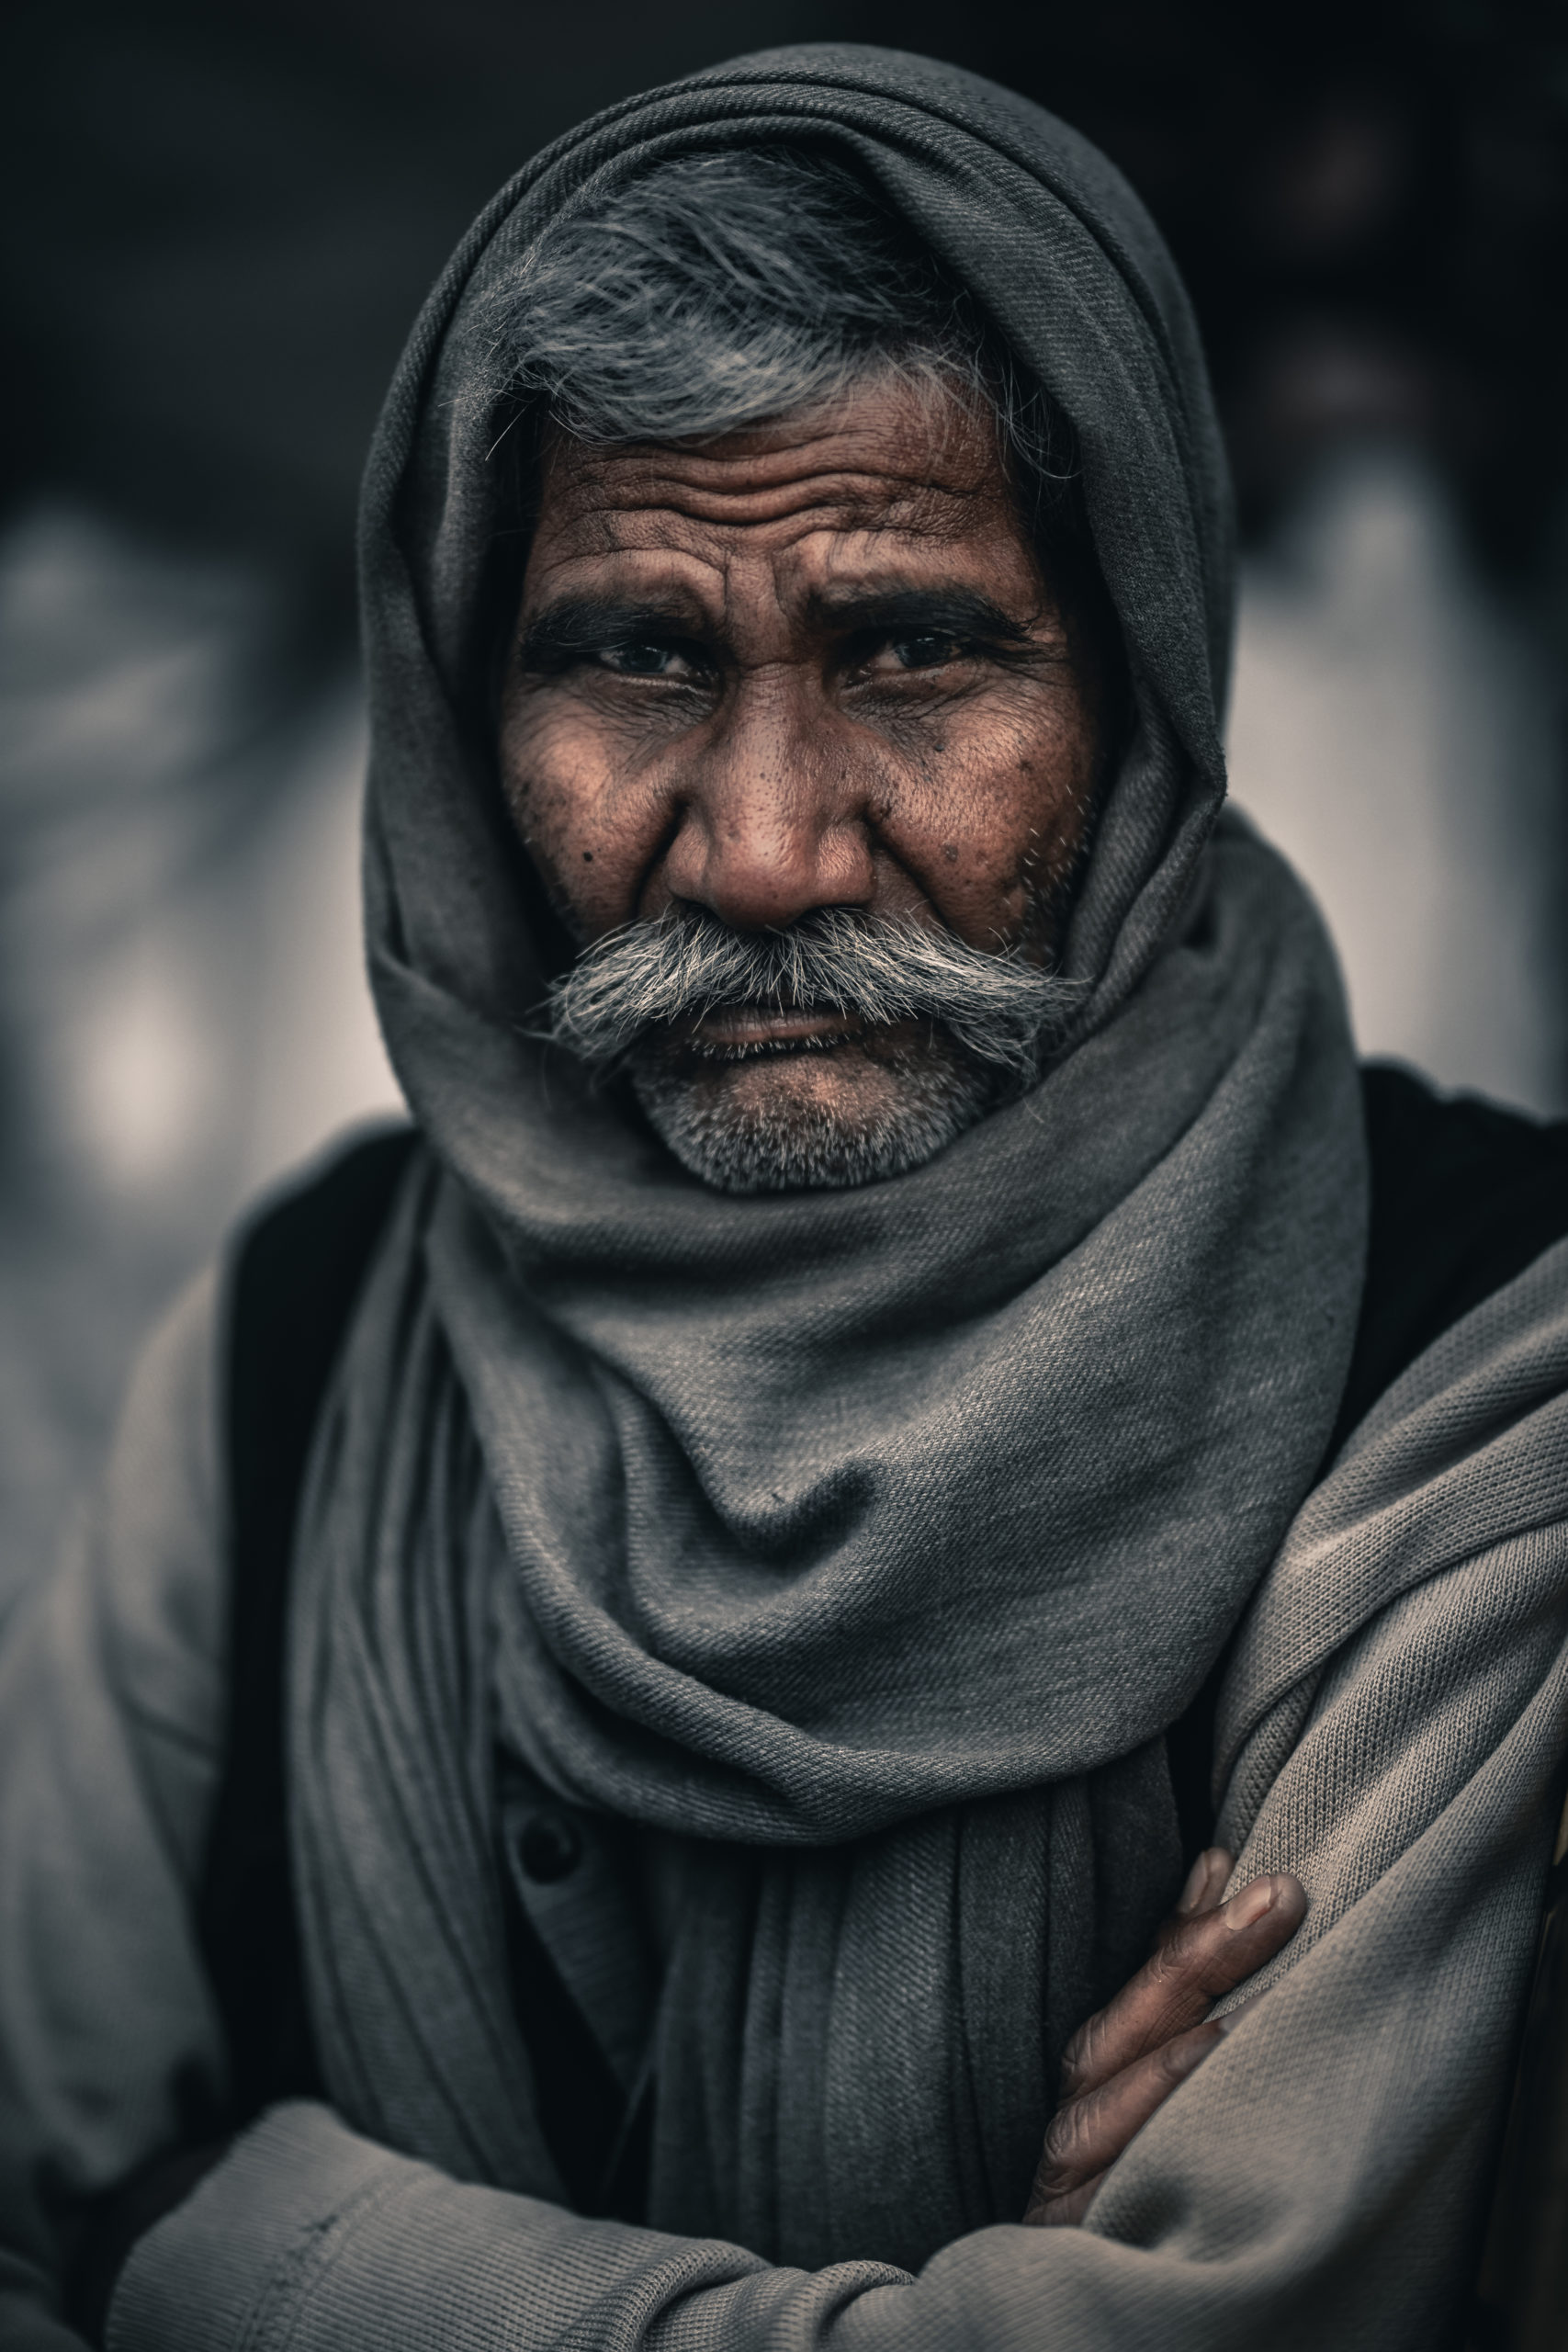 Portrait street photography of an old man in the streets of Mathura, India